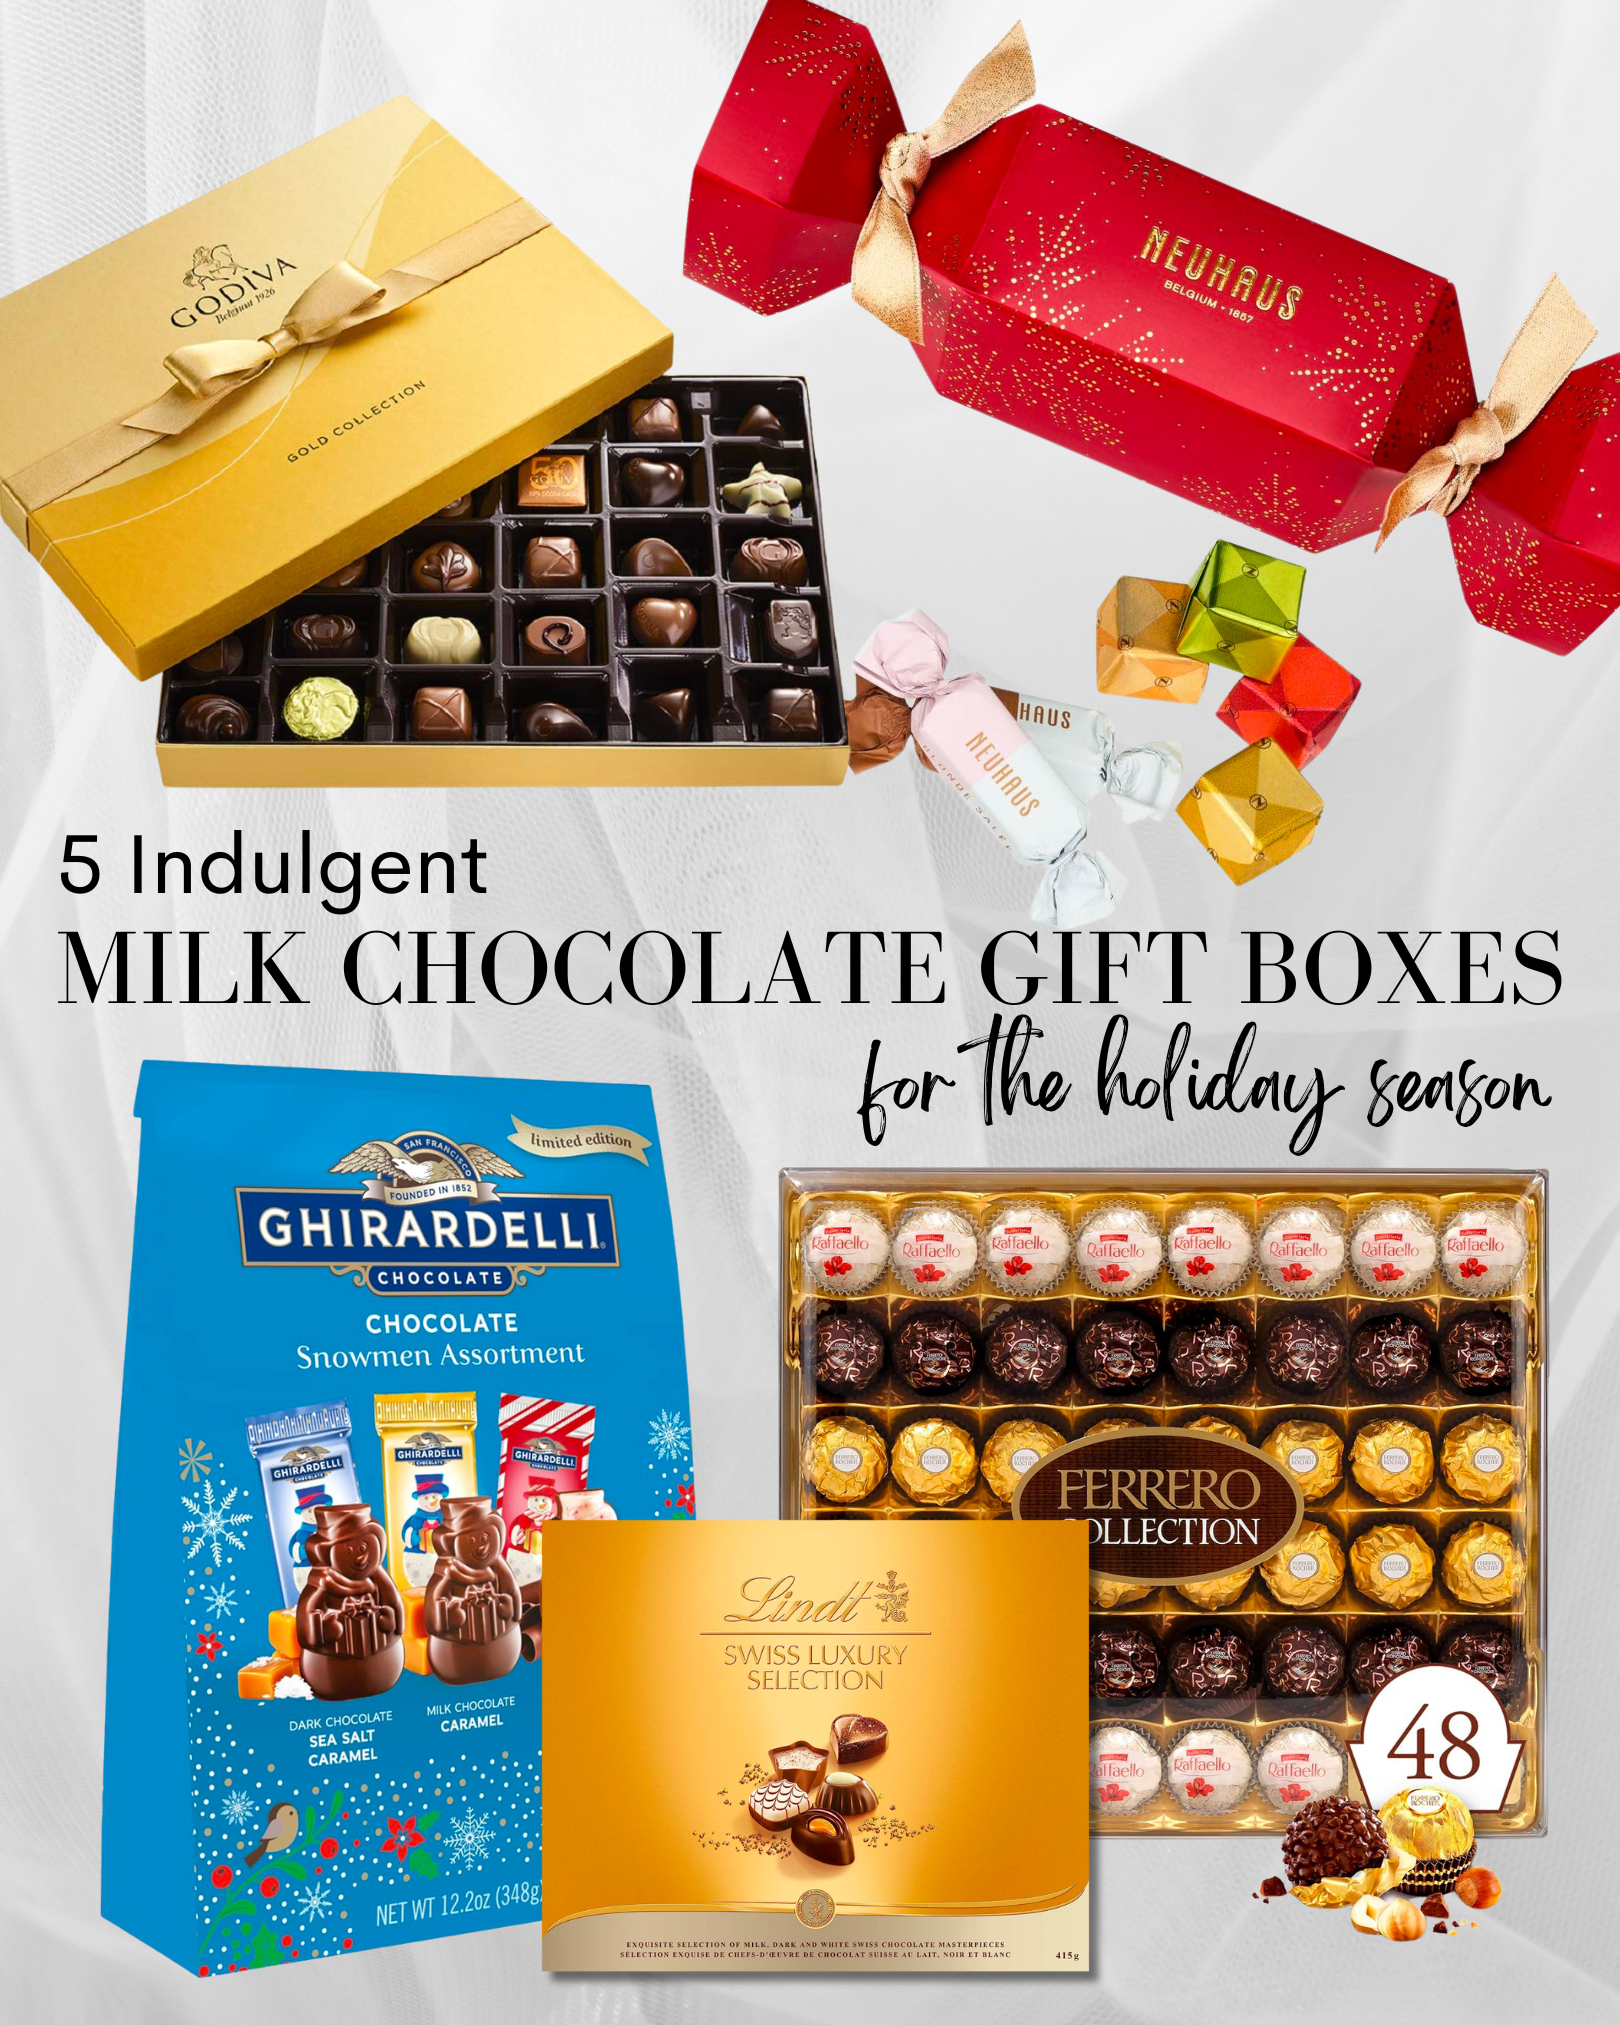 5 Indulgent Milk Chocolate Gift Boxes for the Holidays